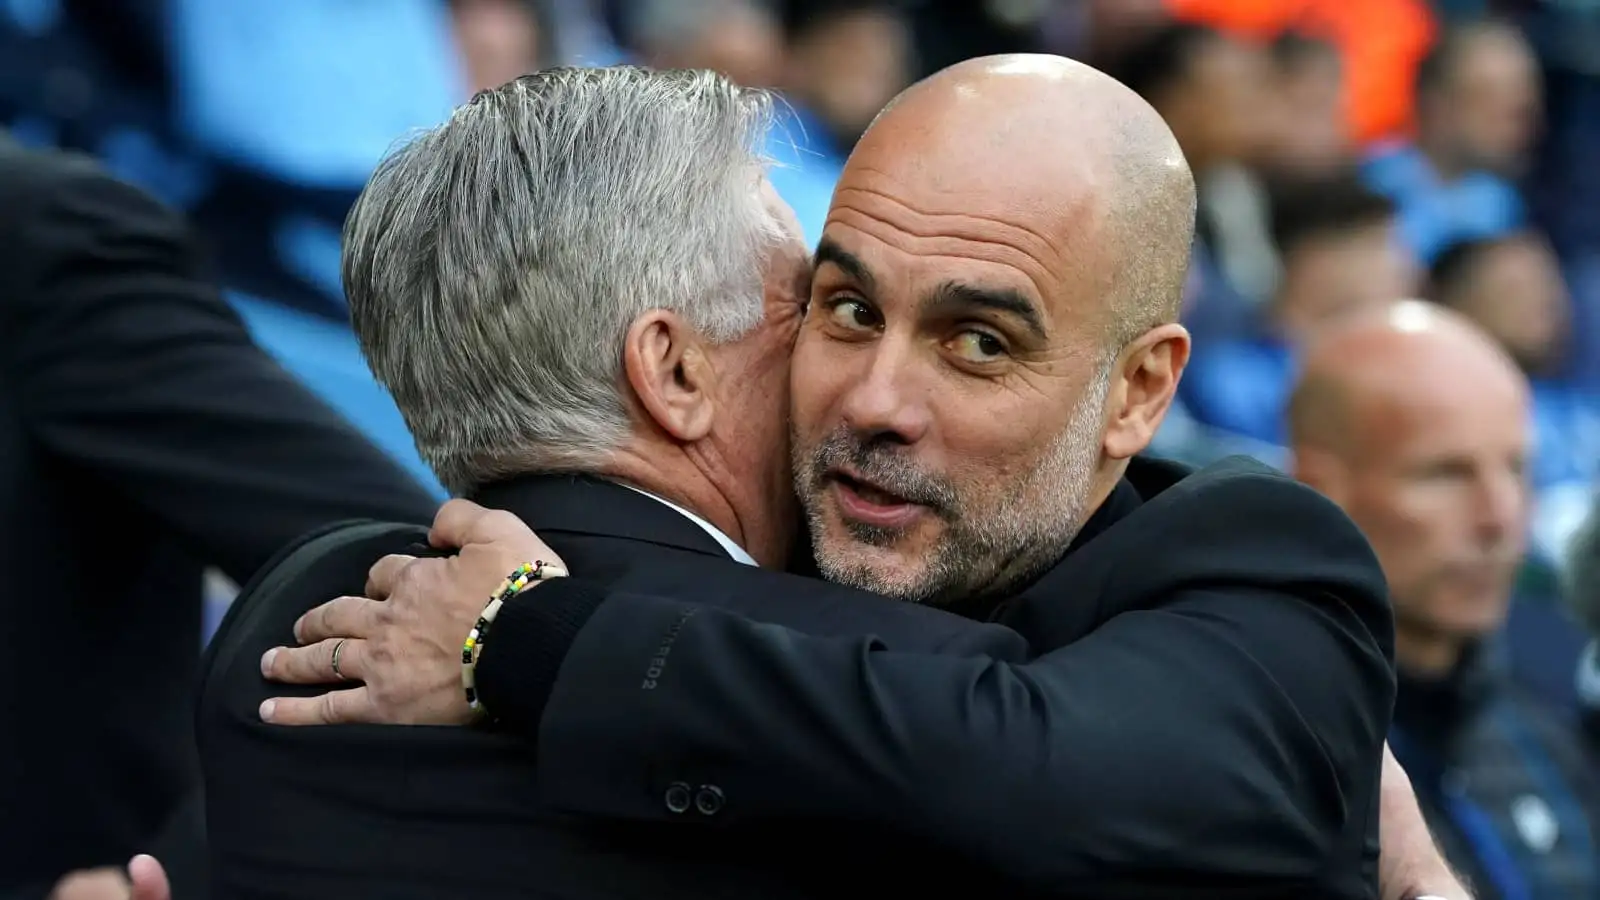 Real Madrid manager Carlo Ancelotti embracing Man City manager Pep Guardiola